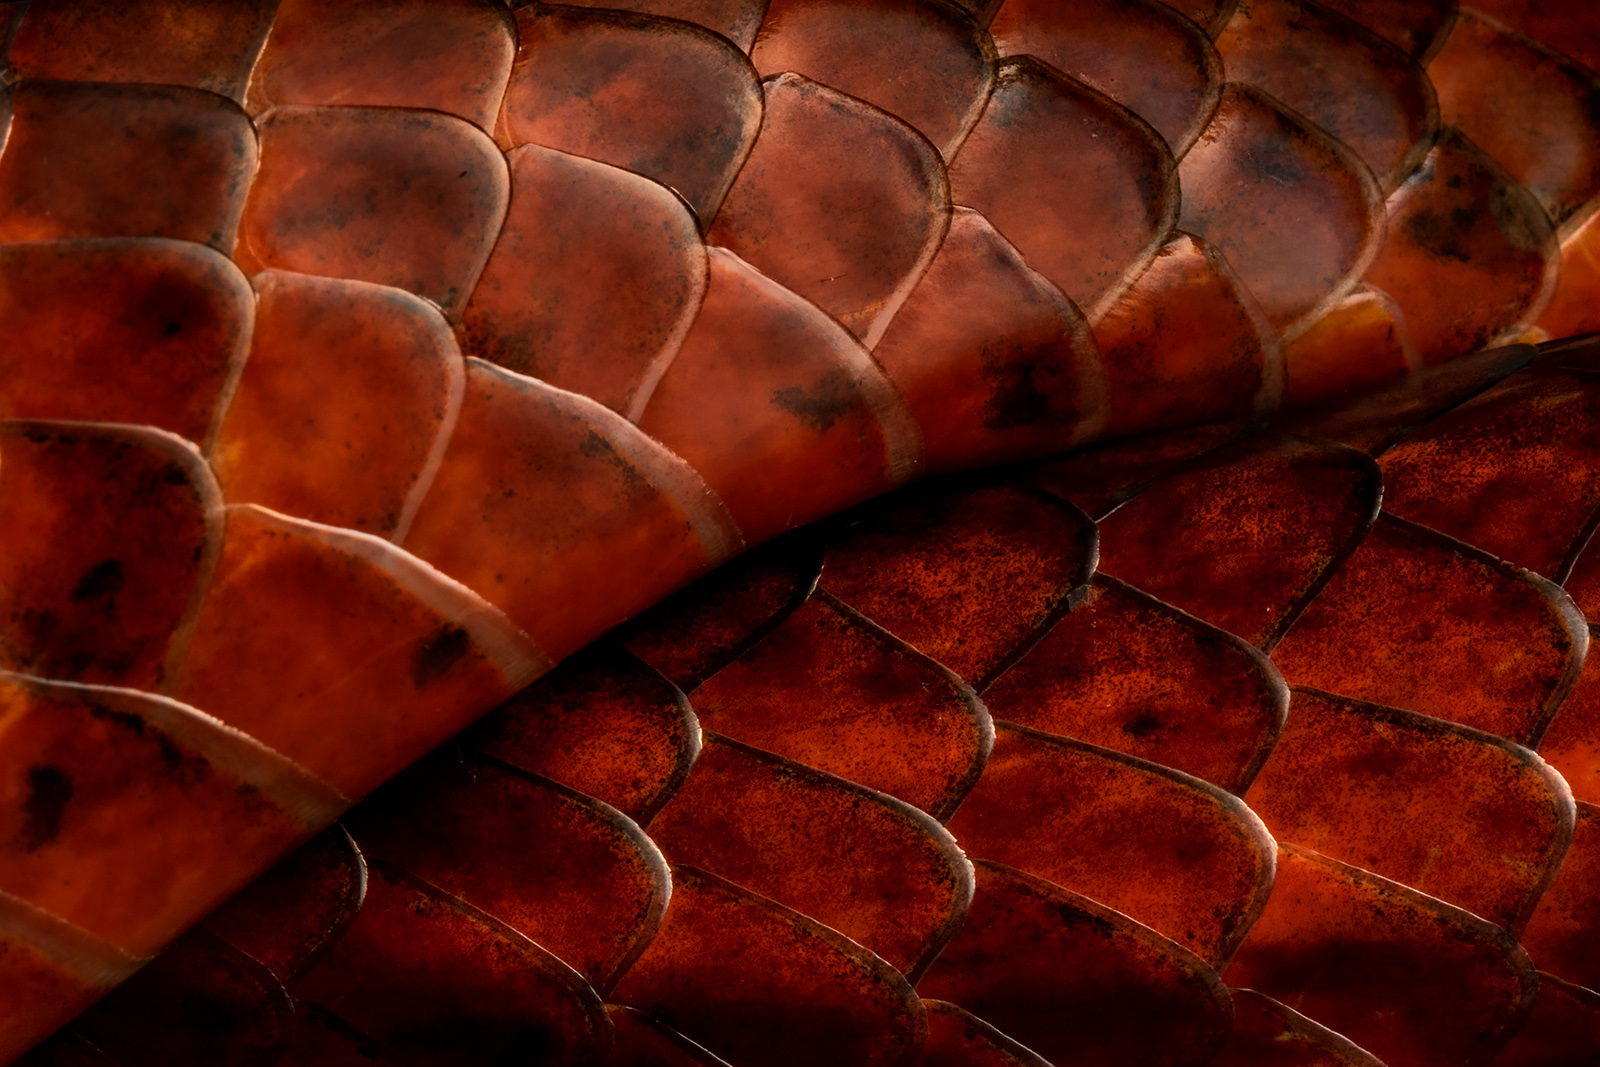 Extreme macro photo of the scales of a Rusty Whipsnake (Chironius scurrulus), created using extension tubes on the Canon 100mm f/2.8L Macro Lens